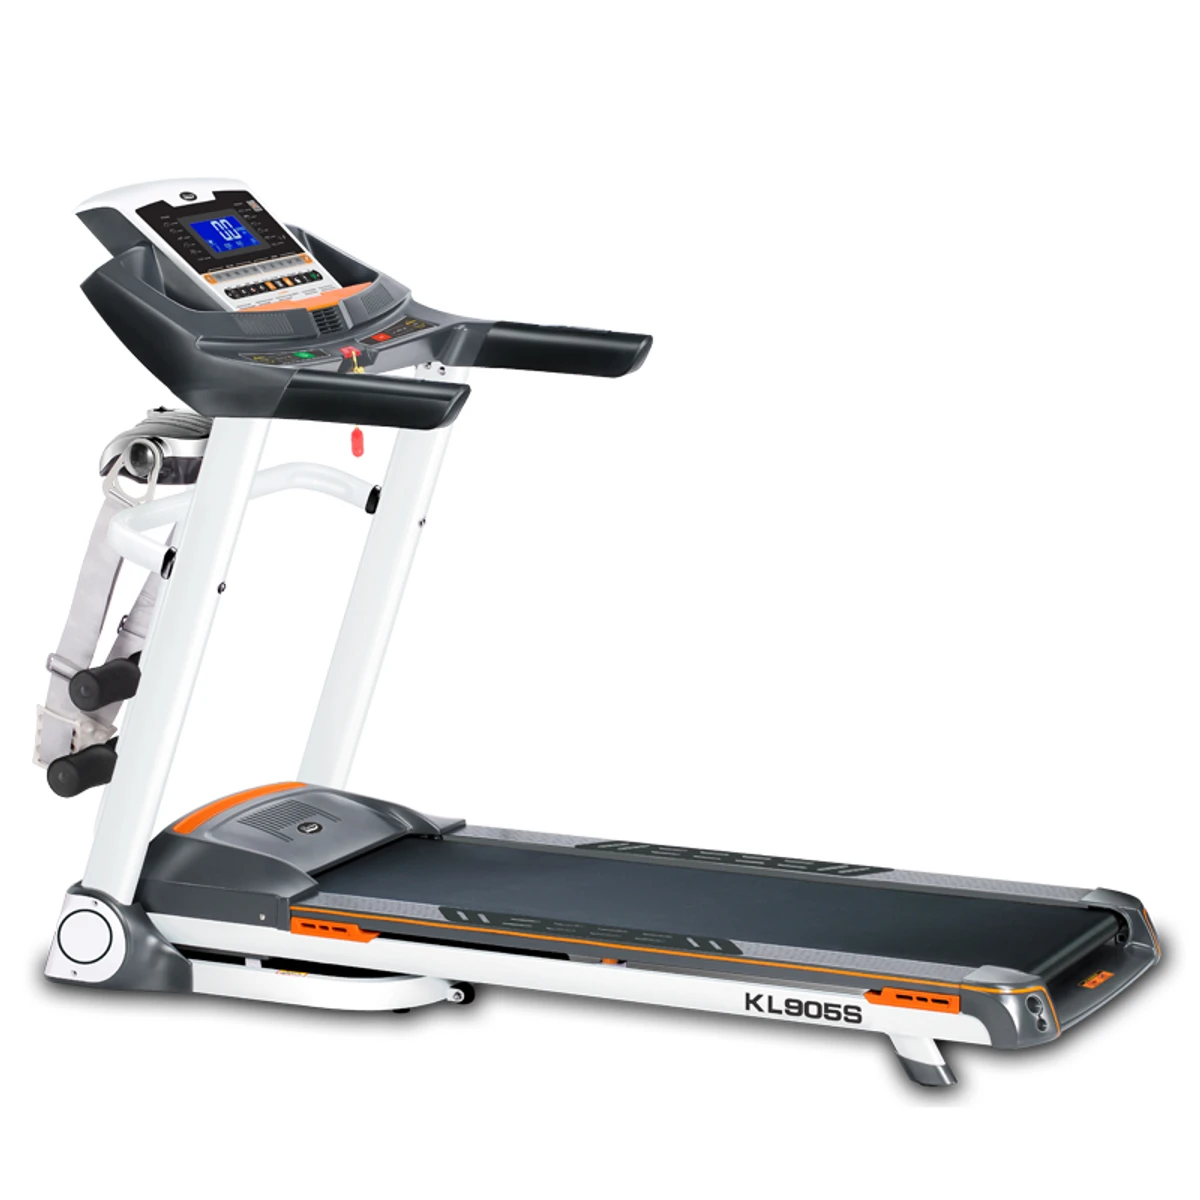 Daily youth KL905S Multi-function Foldable Motorized Treadmill